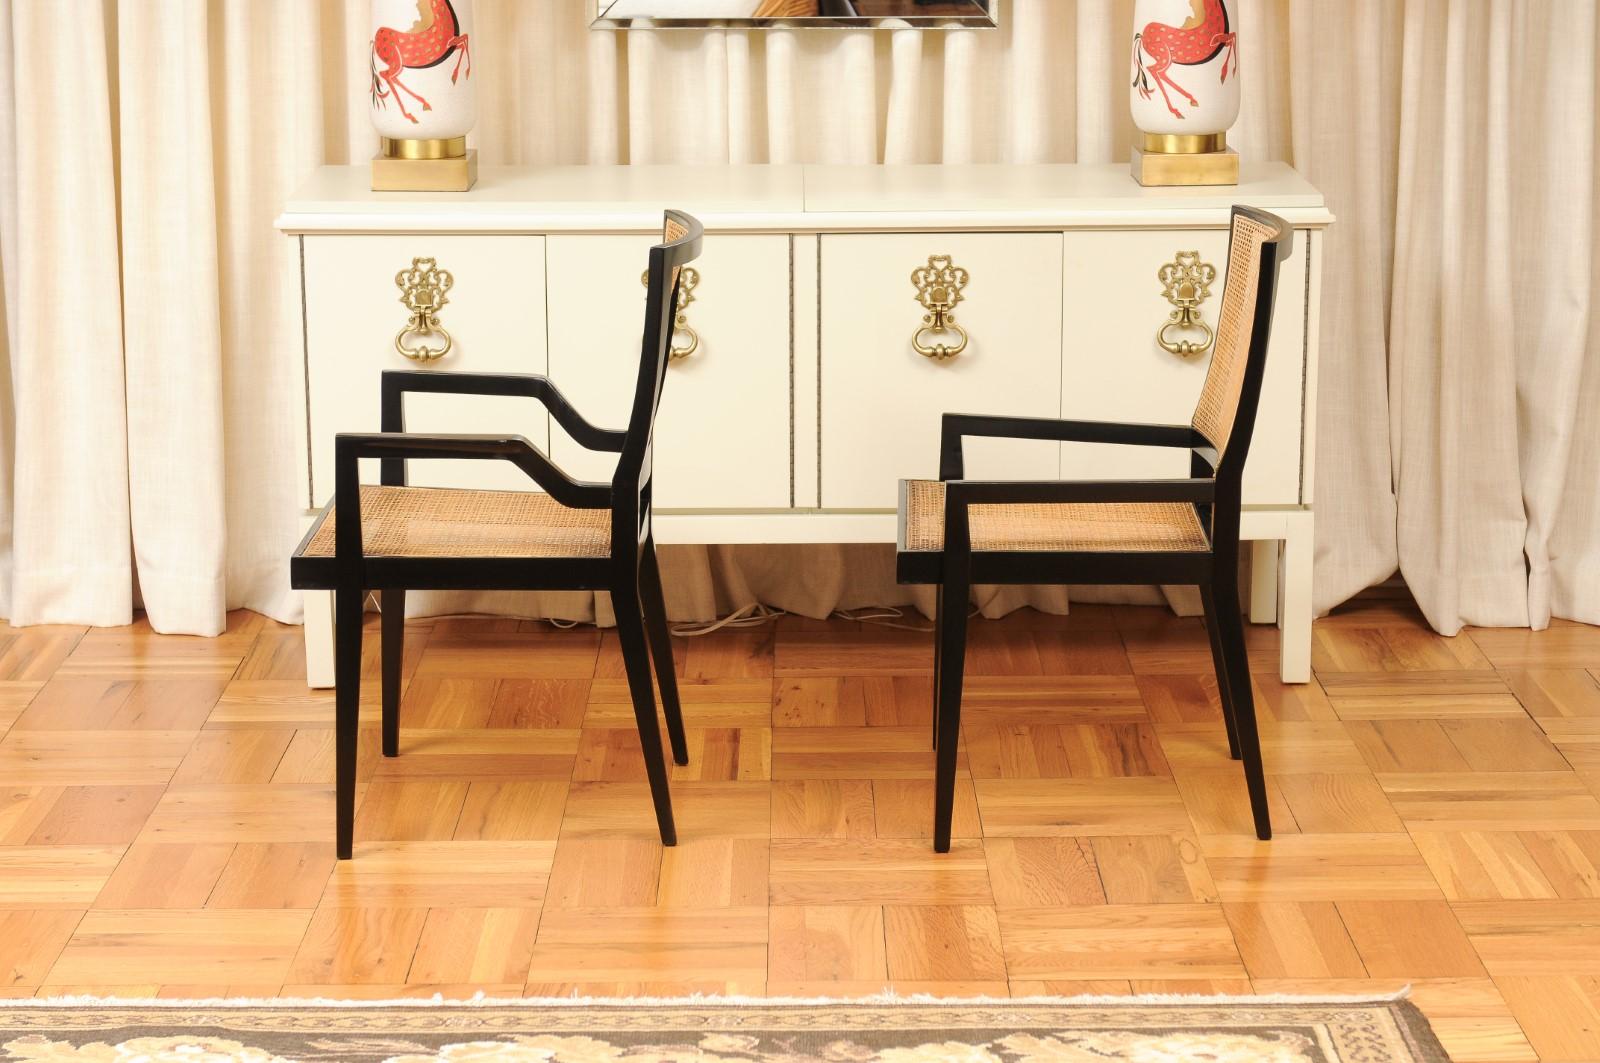 Spectacular Set of 20 Sleek Double Cane Dining Chairs by Michael Taylor For Sale 4